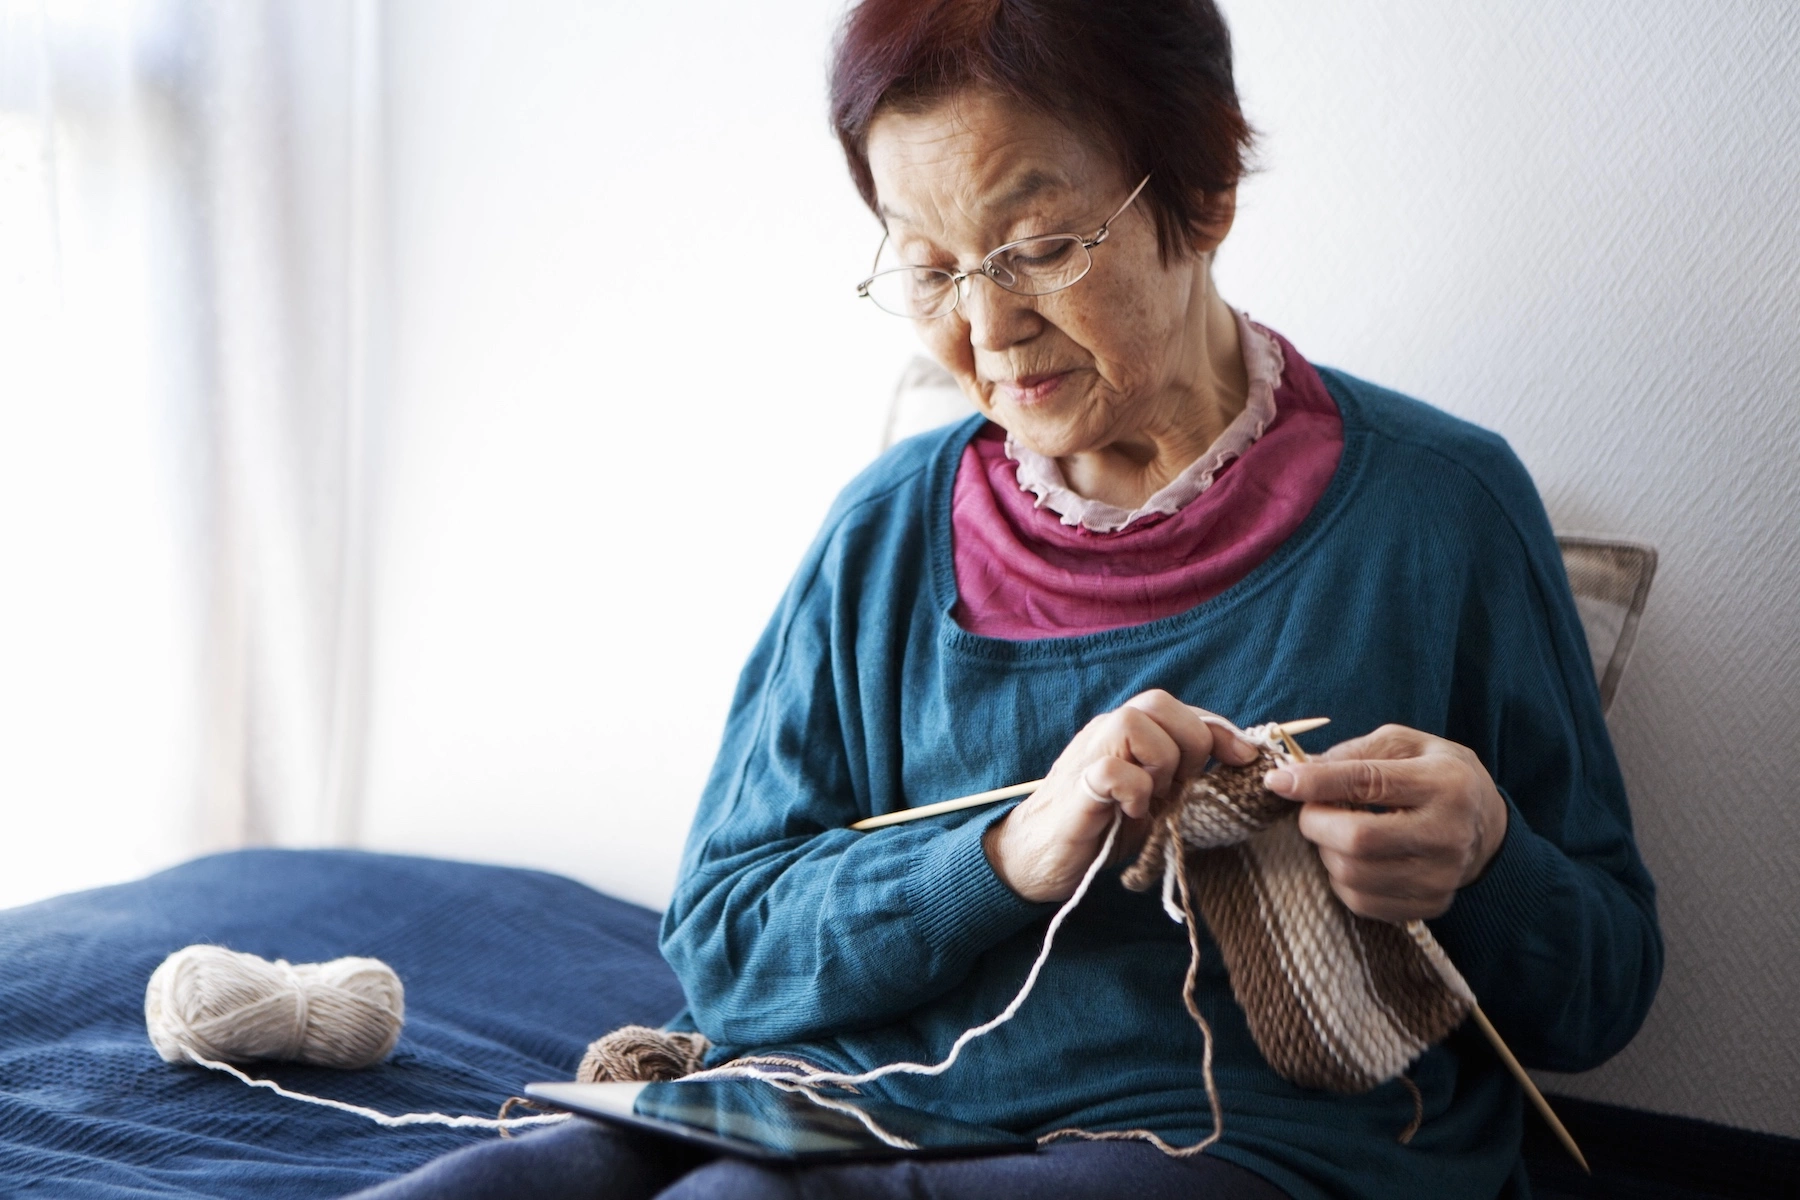 An older adult woman senior woman sits in bed knitting while referring to a pattern on her tablet